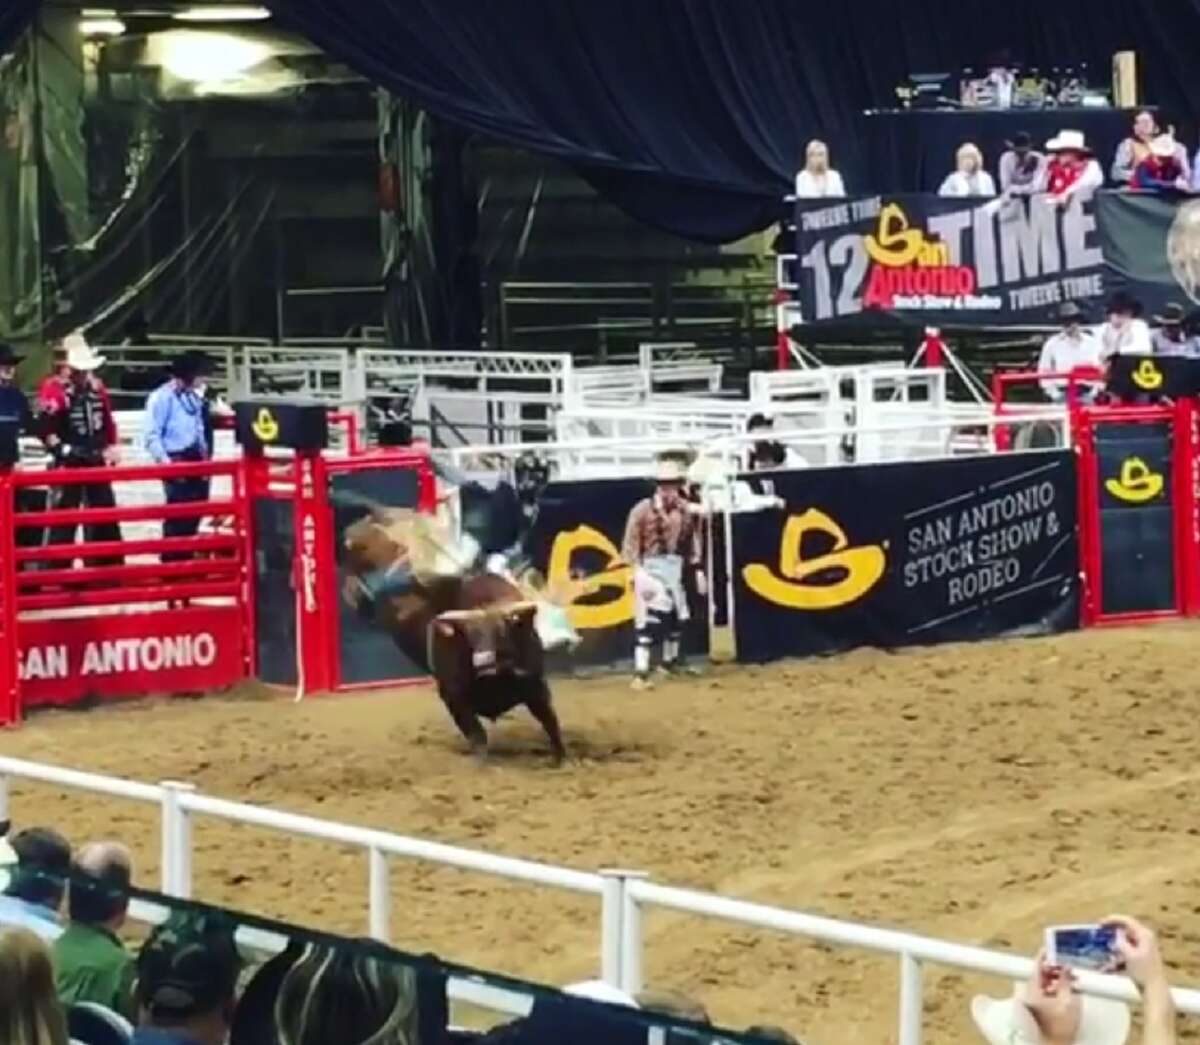 A San Antonio Stock Show & Rodeo bull rider's brutal kick to the head was caught on video by a spectator Wednesday, Feb. 22, 2017.